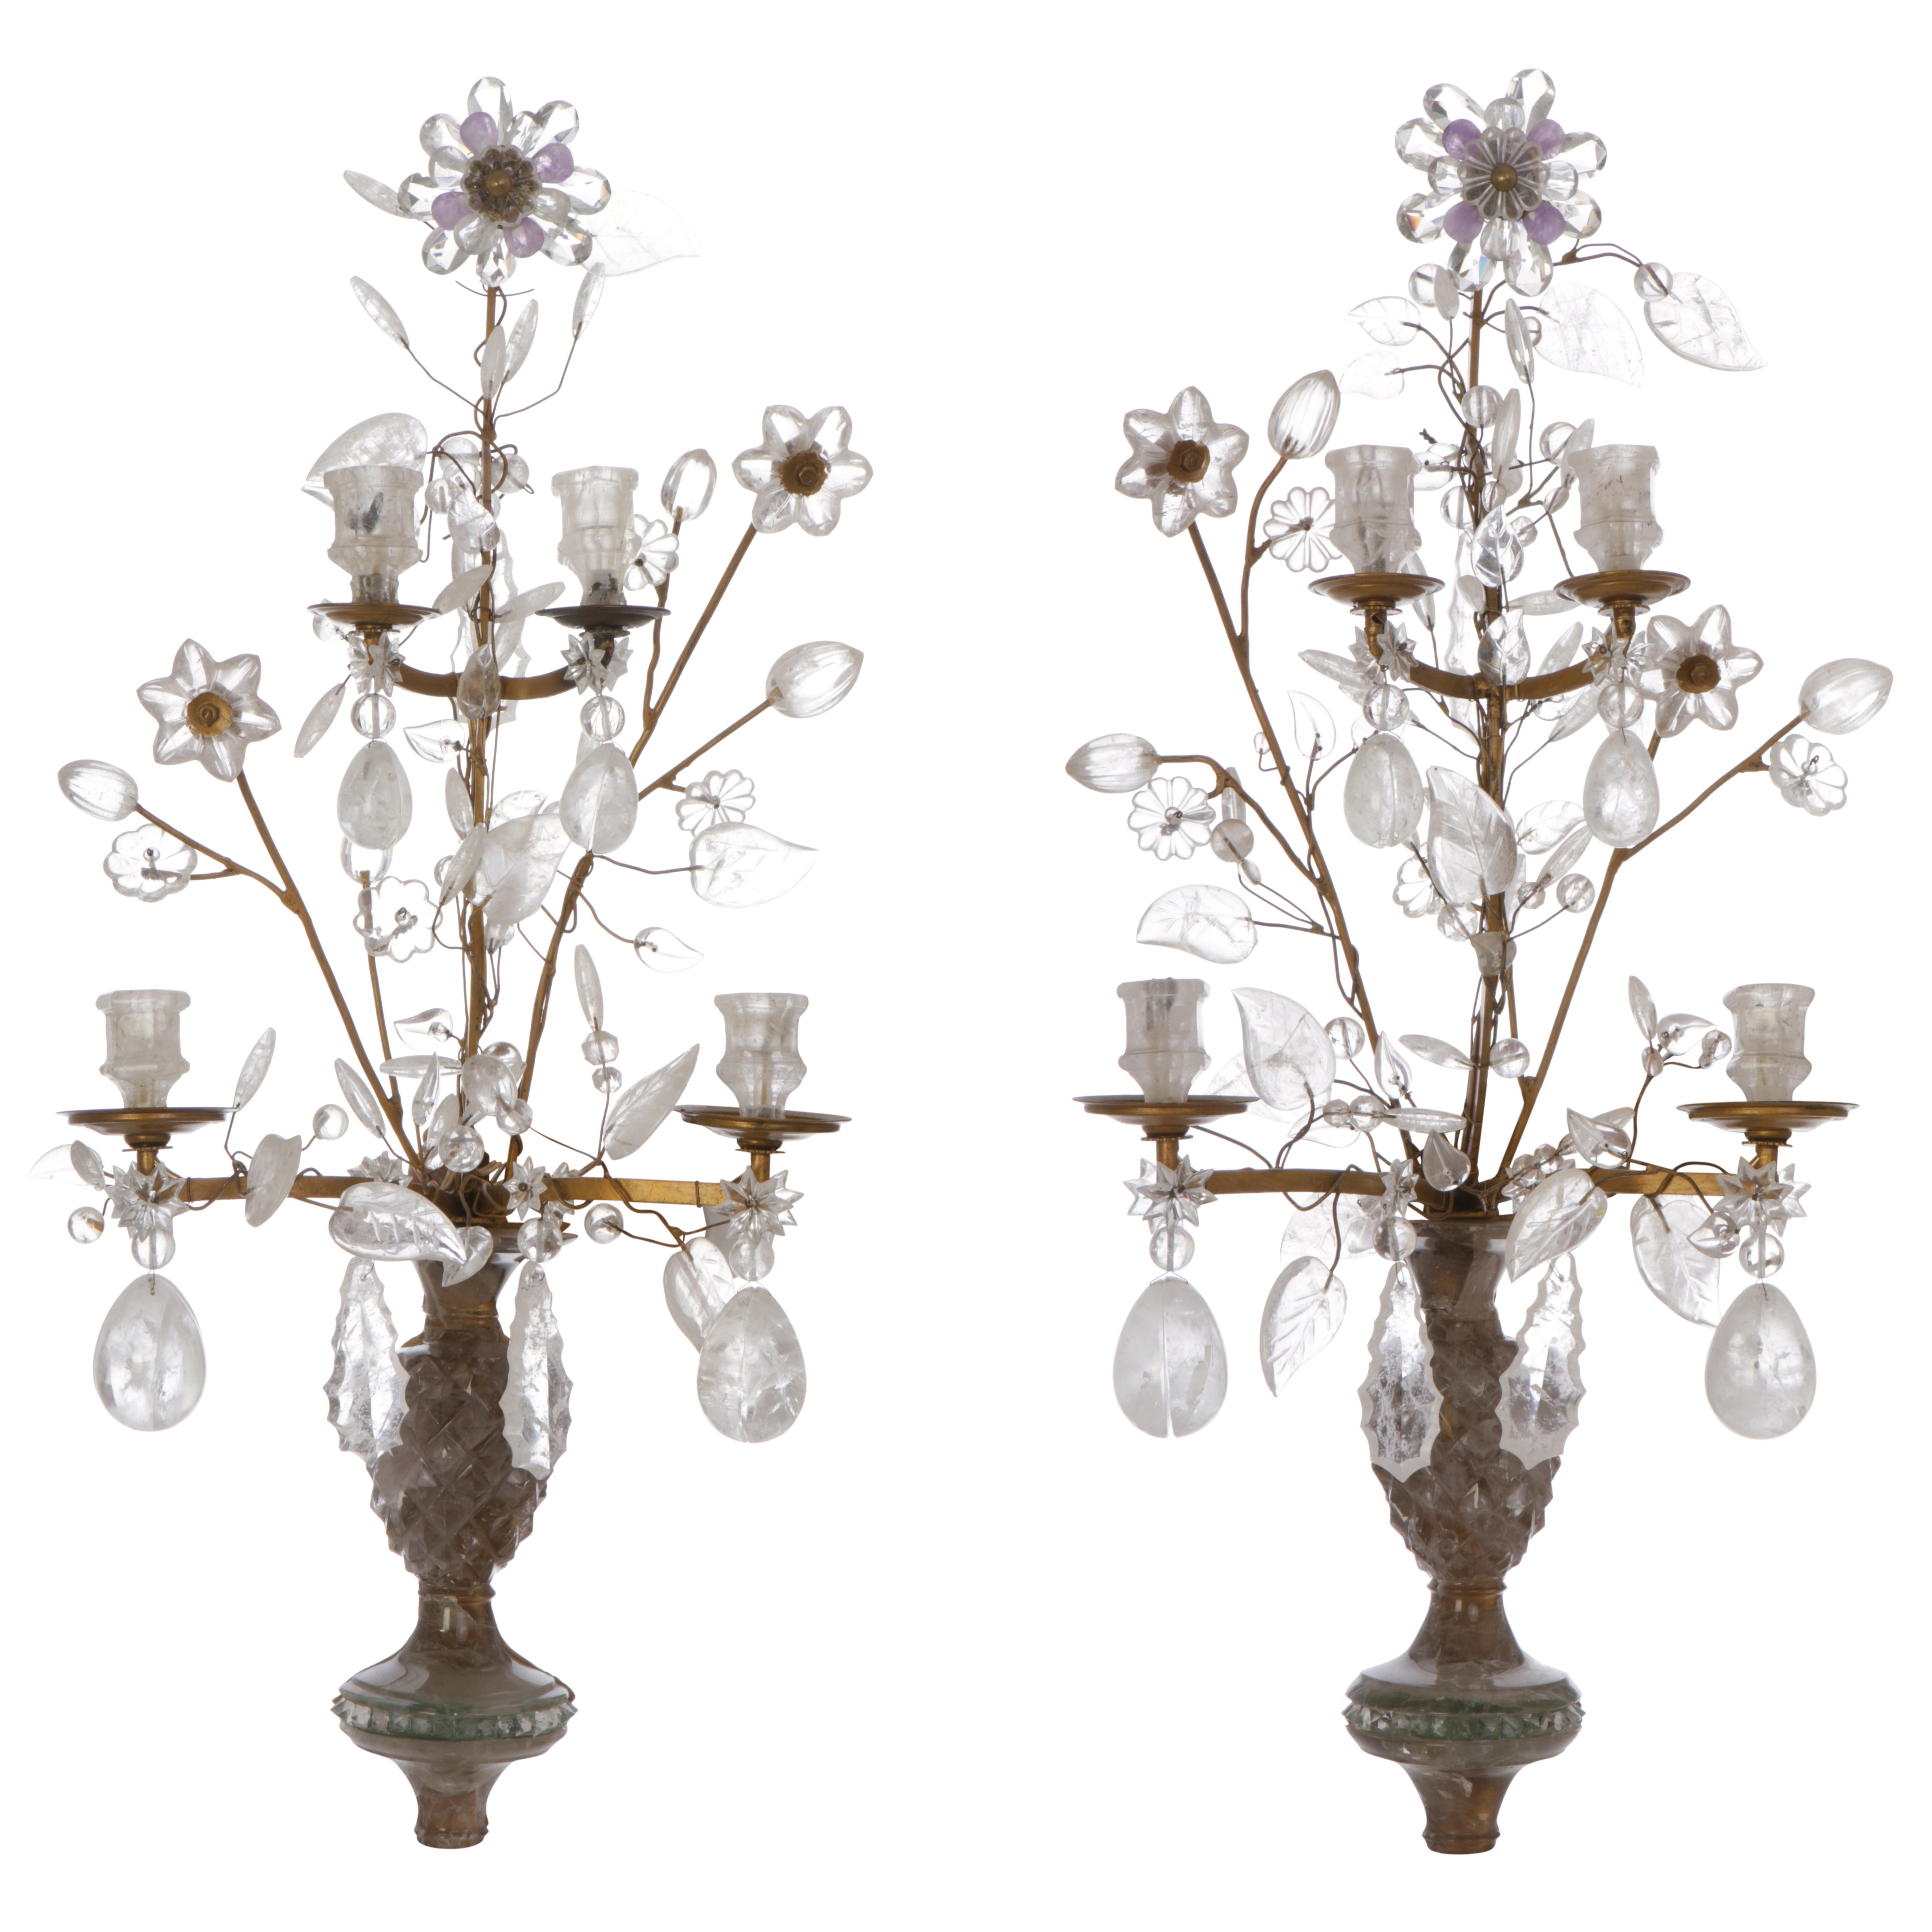 Rock Crystal and Amethyst Floral Design Wall Lights